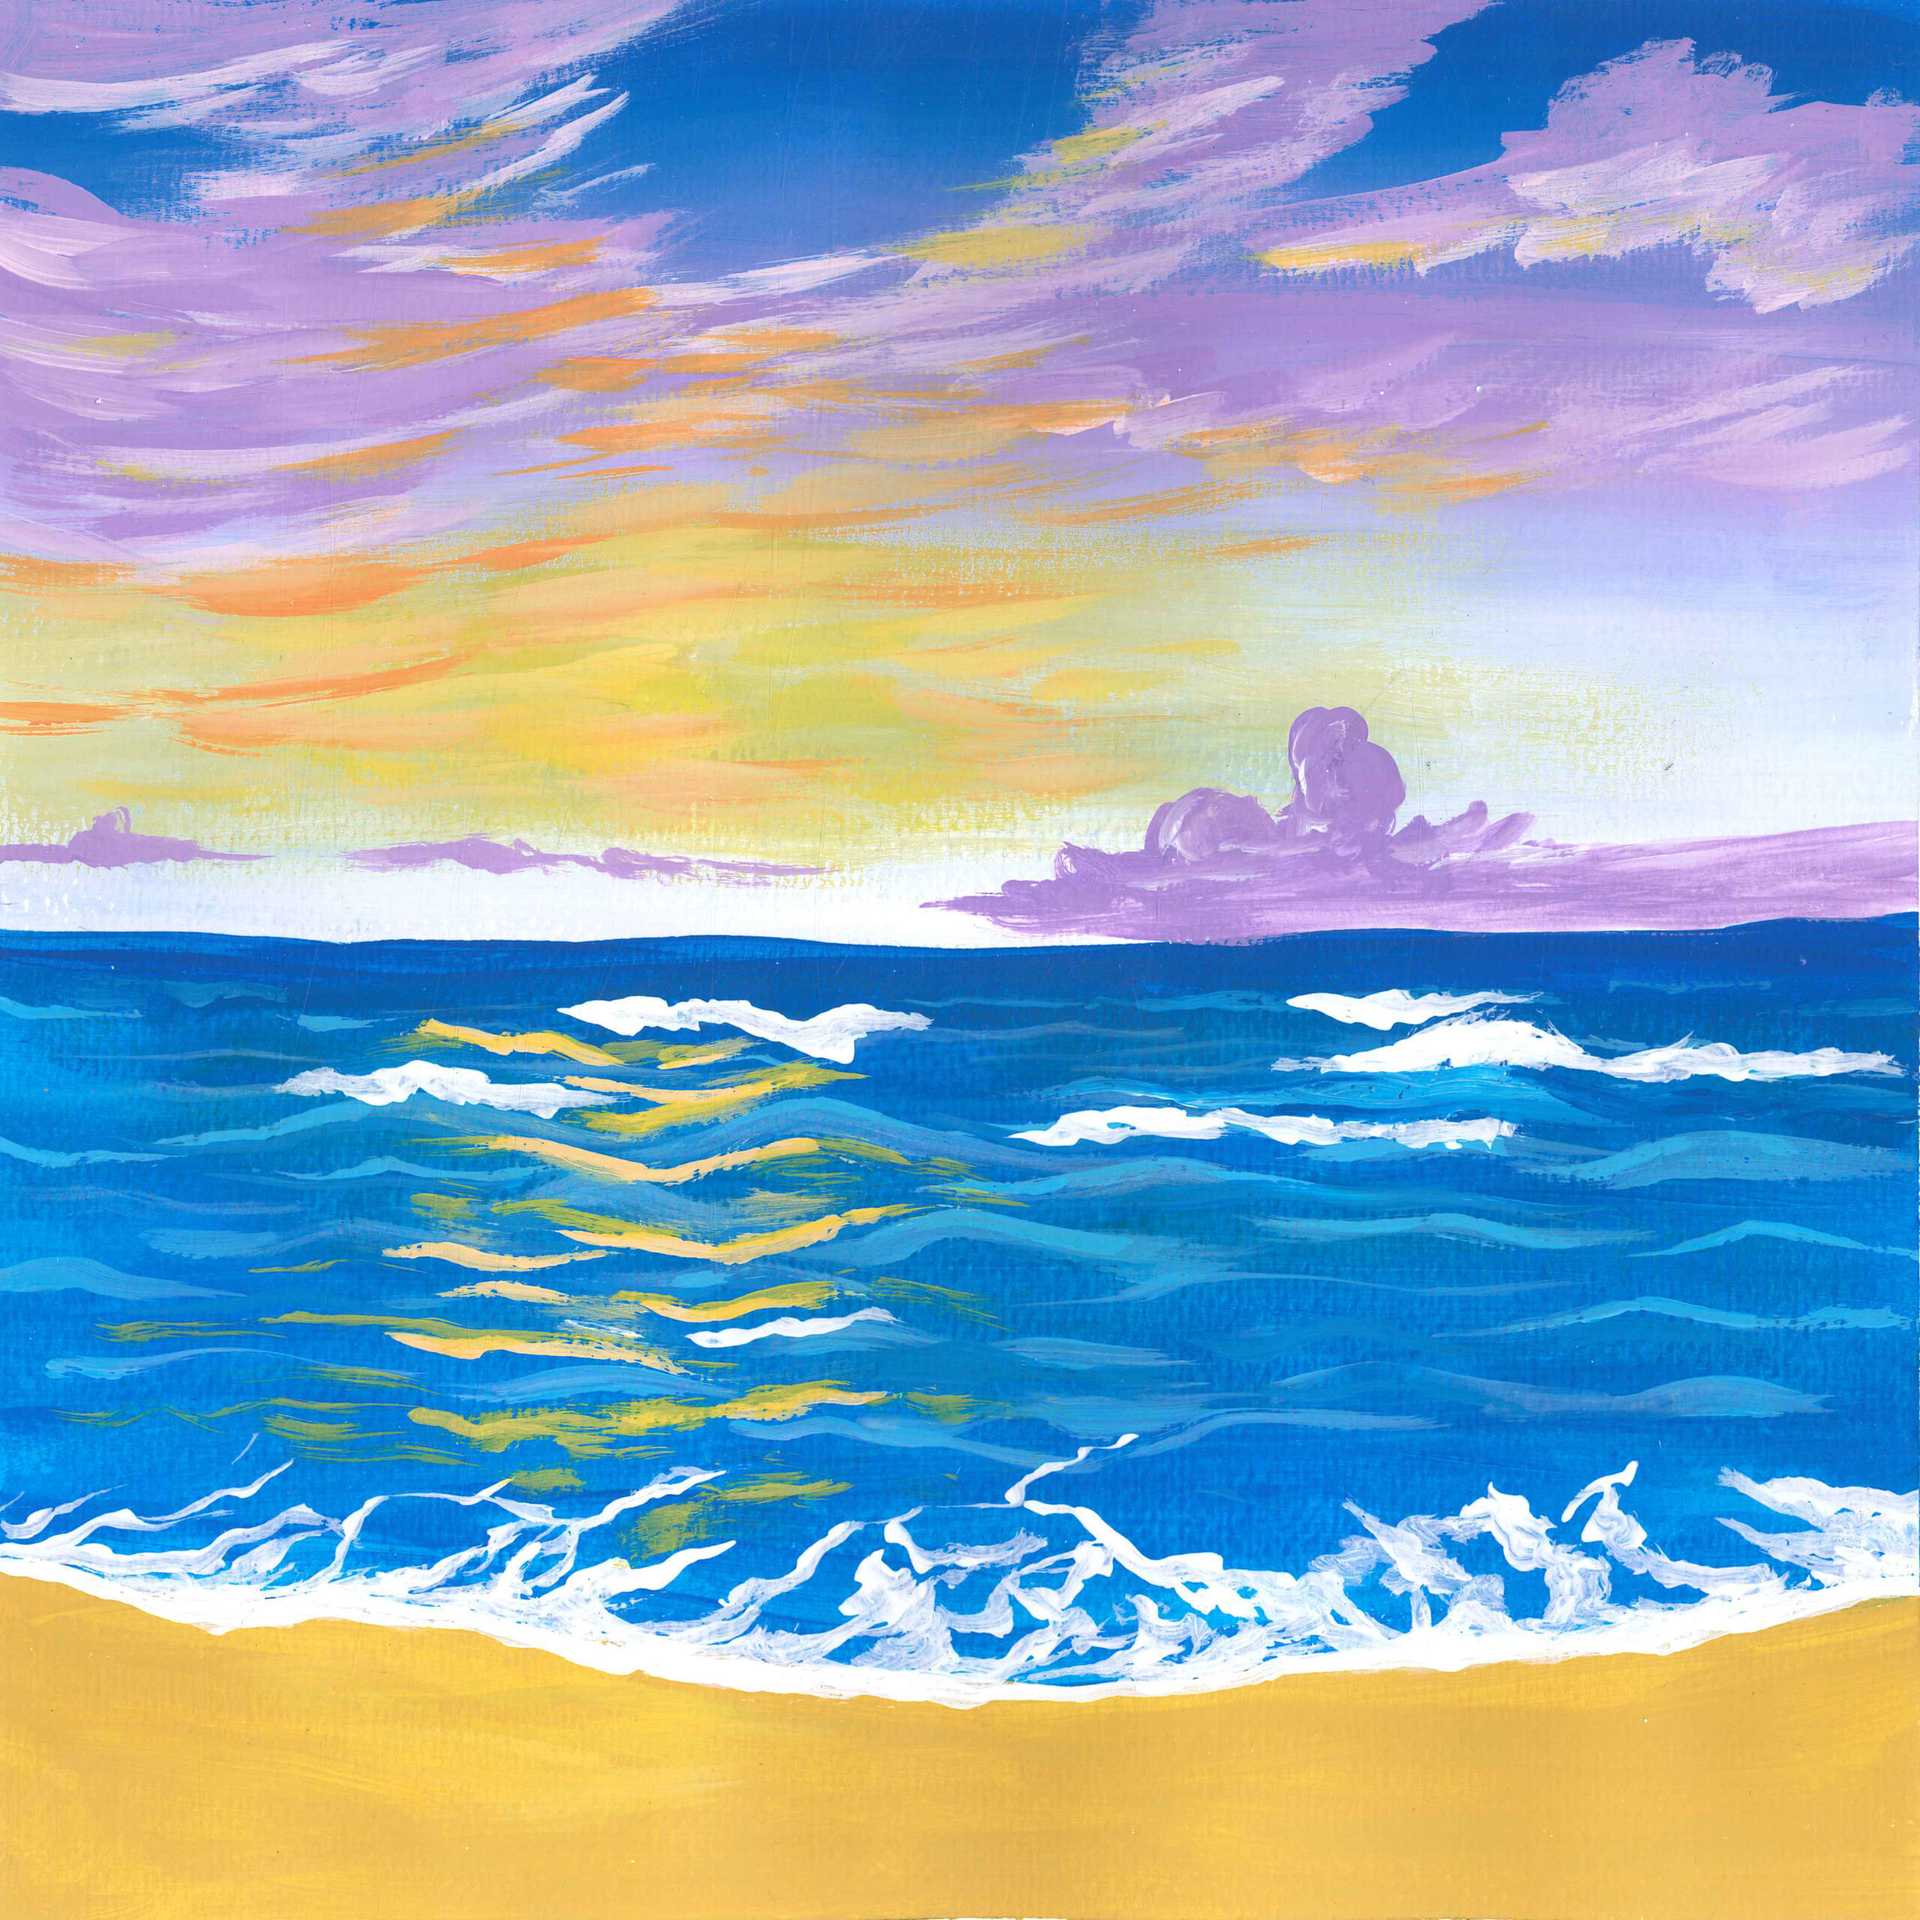 Waves in the Sea in the Gulf of Mexico - nature landscape painting - earth.fm